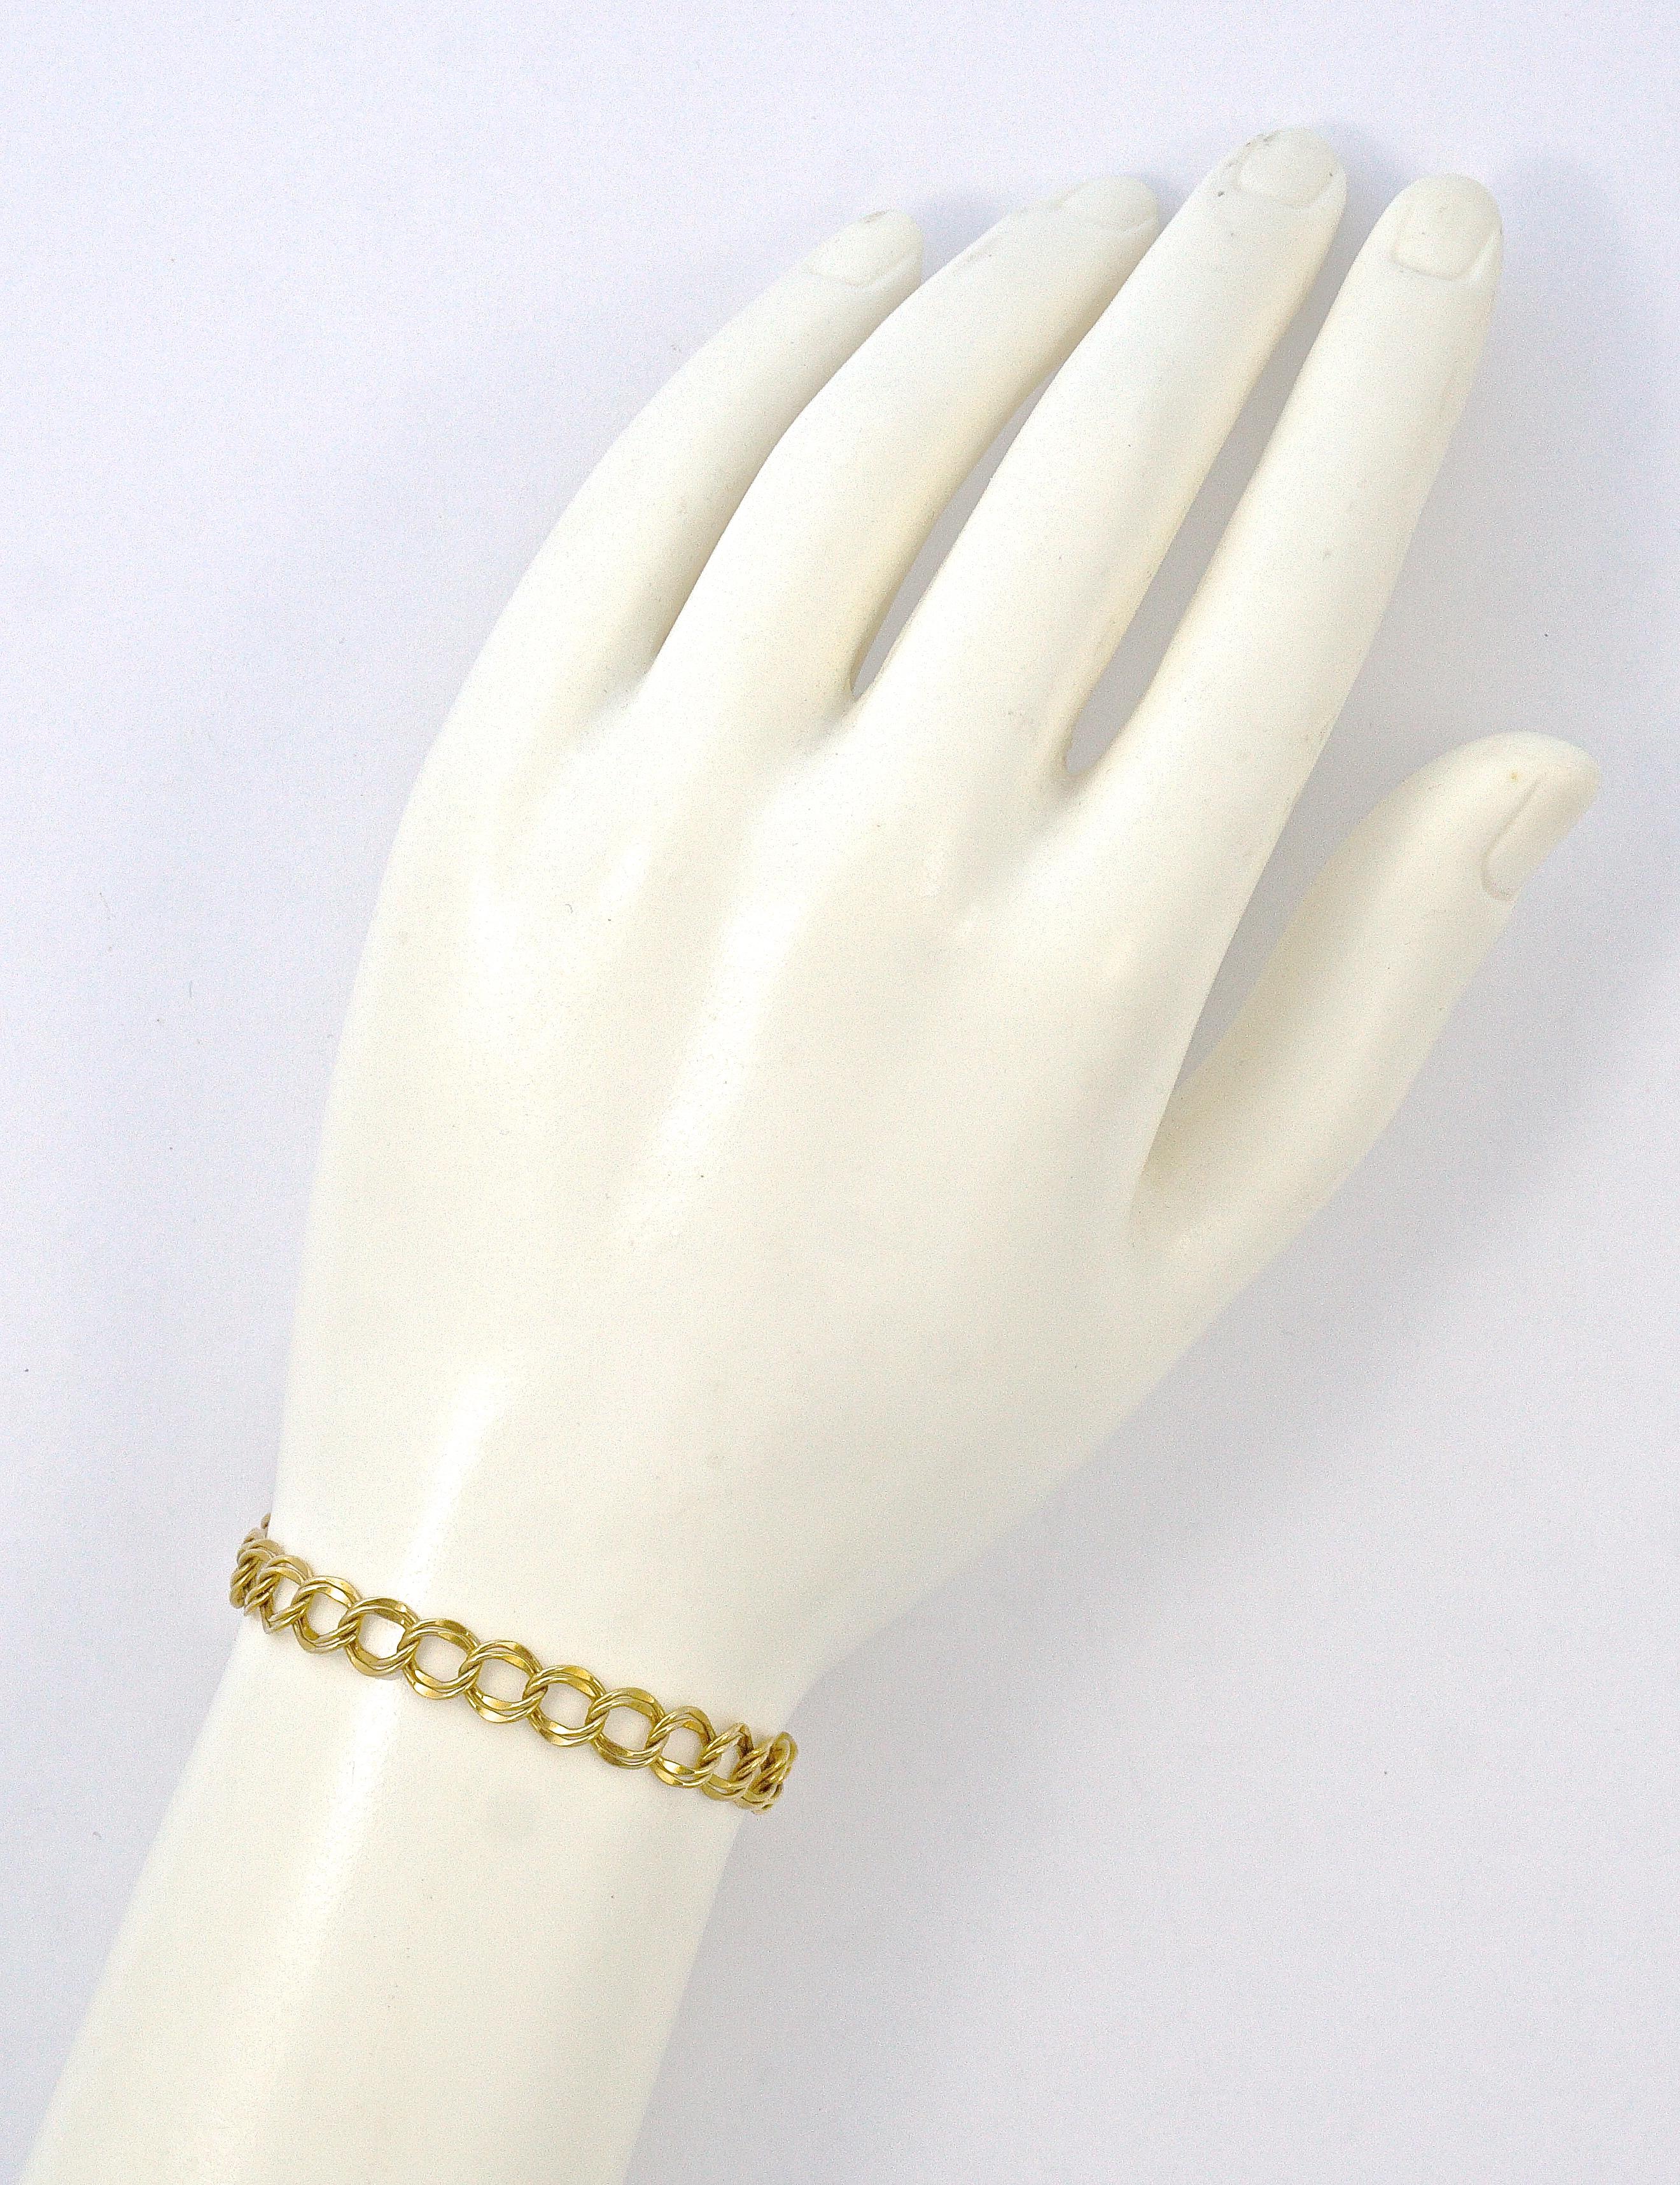 Women's or Men's 12K Gold Filled Double Curb Link Bracelet with Safety Chain 